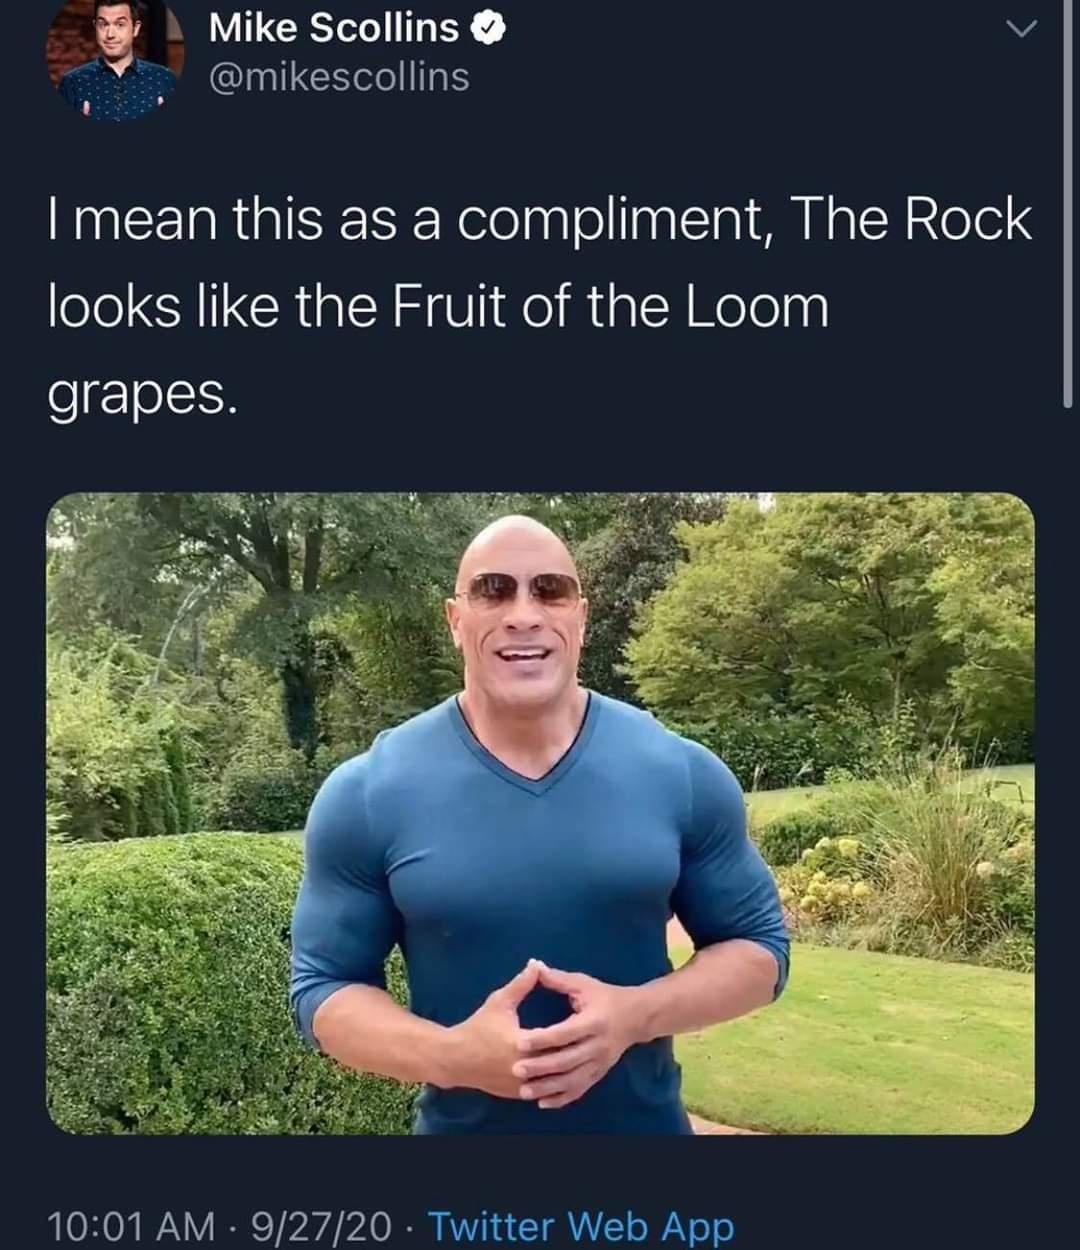 Joe Biden - Mike Scollins I mean this as a compliment, The Rock looks the Fruit of the Loom grapes. 92720 Twitter Web App